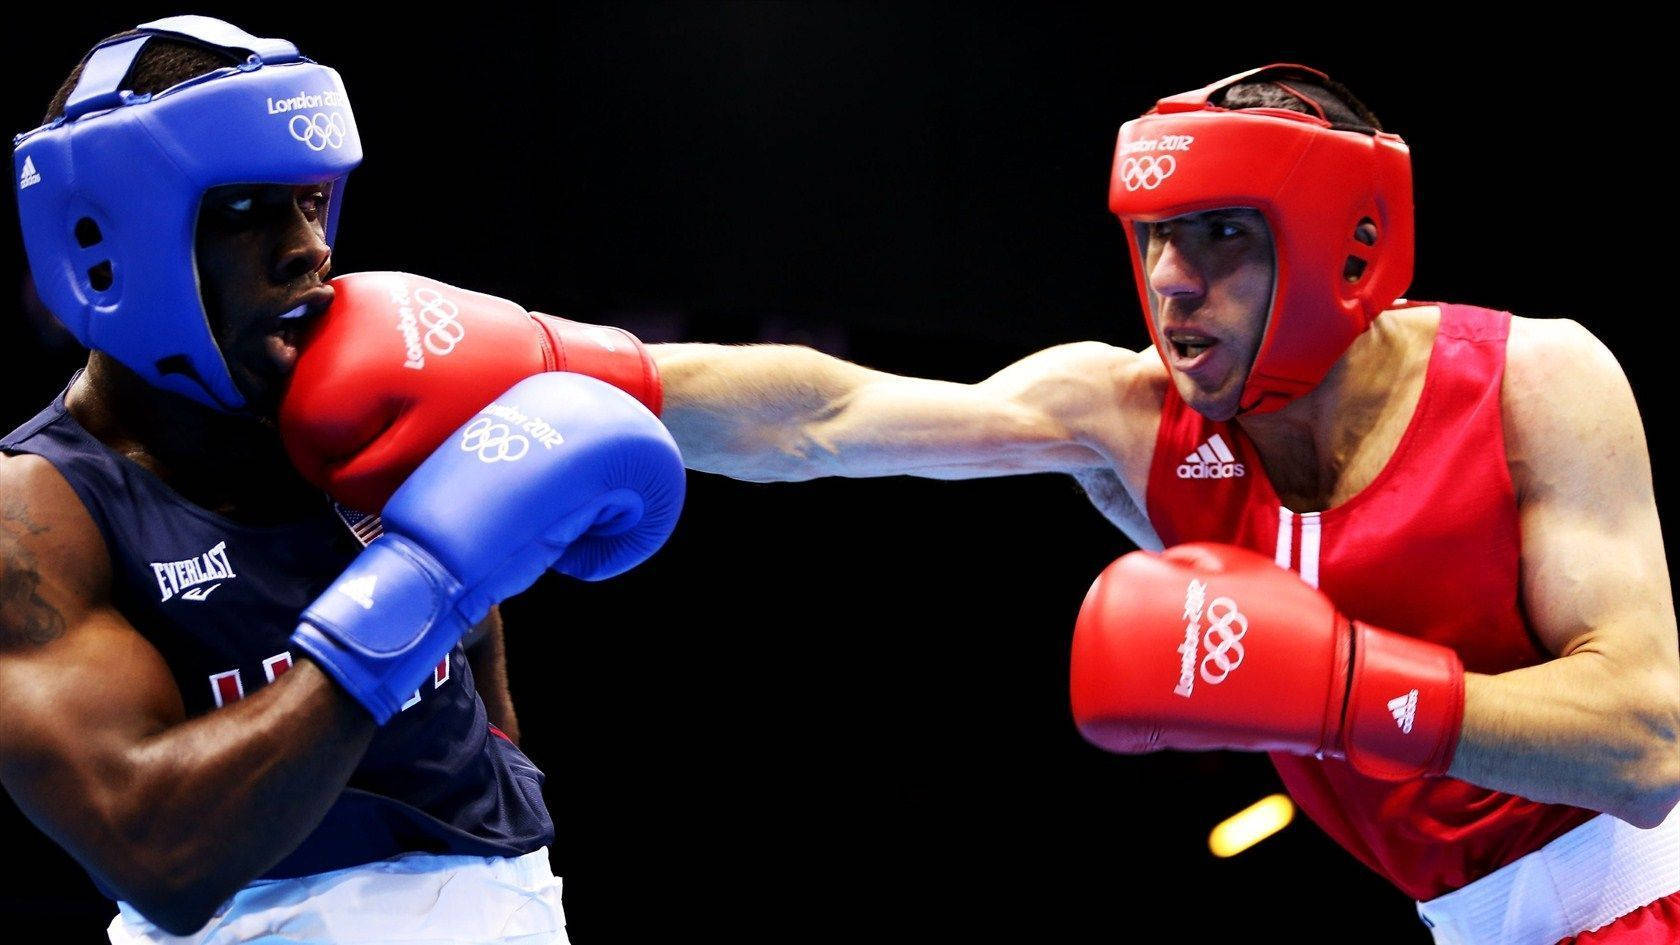 Two Boxers In Blue And Red Fighting In A Boxing Ring